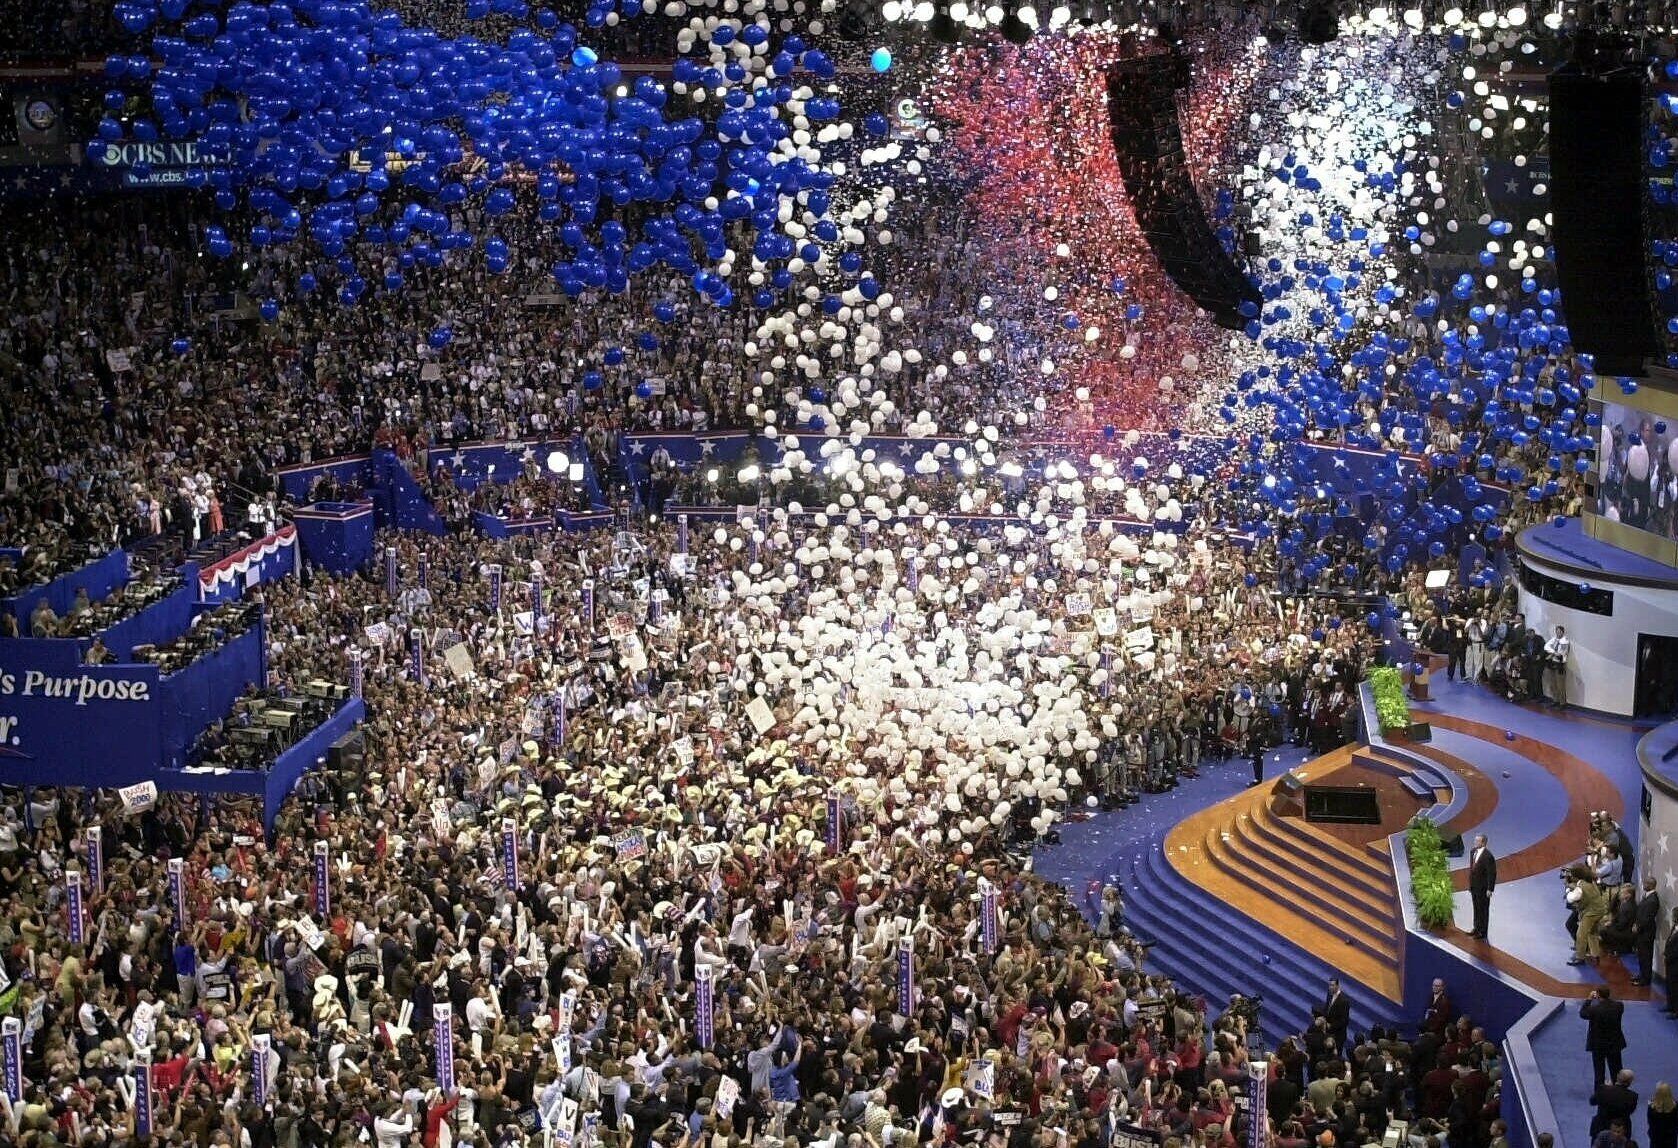 <p>In 2000, Republicans awarded Texas Gov. George W. Bush their 2000 presidential nomination at the party&#8217;s convention in Philadelphia and ratified Dick Cheney as his running mate.</p>
<p>Republican presidential candidate George W. Bush accepts his party&#8217;s nomination as a shower of balloons fall to the First Union Center floor at the end of the Republican National Convention in Philadelphia Thursday, Aug. 3, 2000. (AP Photo/Robert F. Bukaty)</p>
